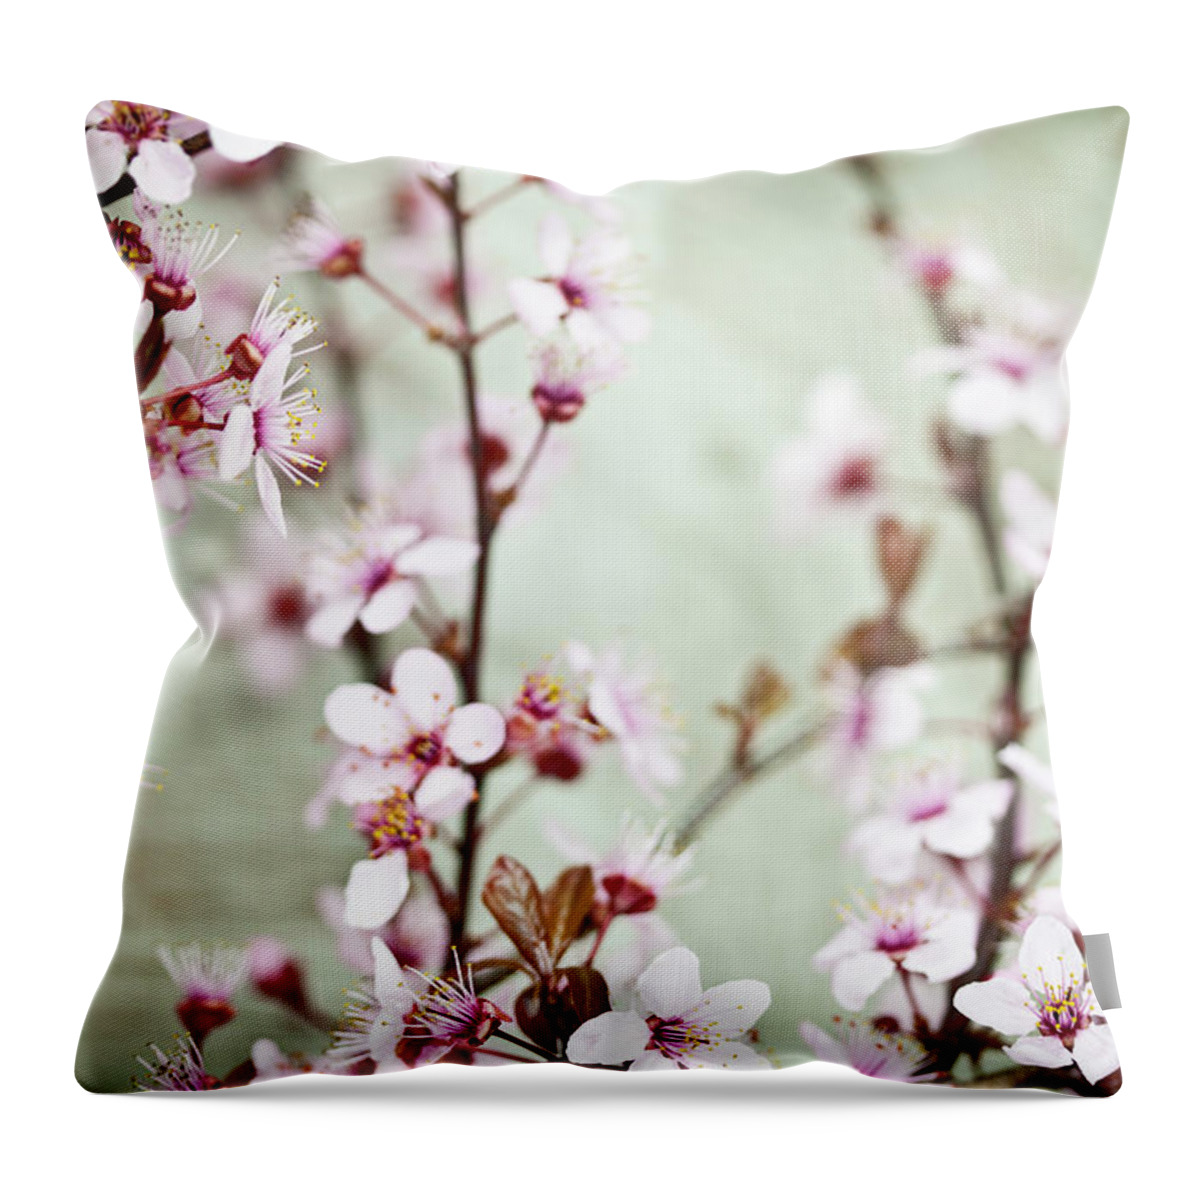 Bud Throw Pillow featuring the photograph Antiqued Cherry Blossom by Catlane